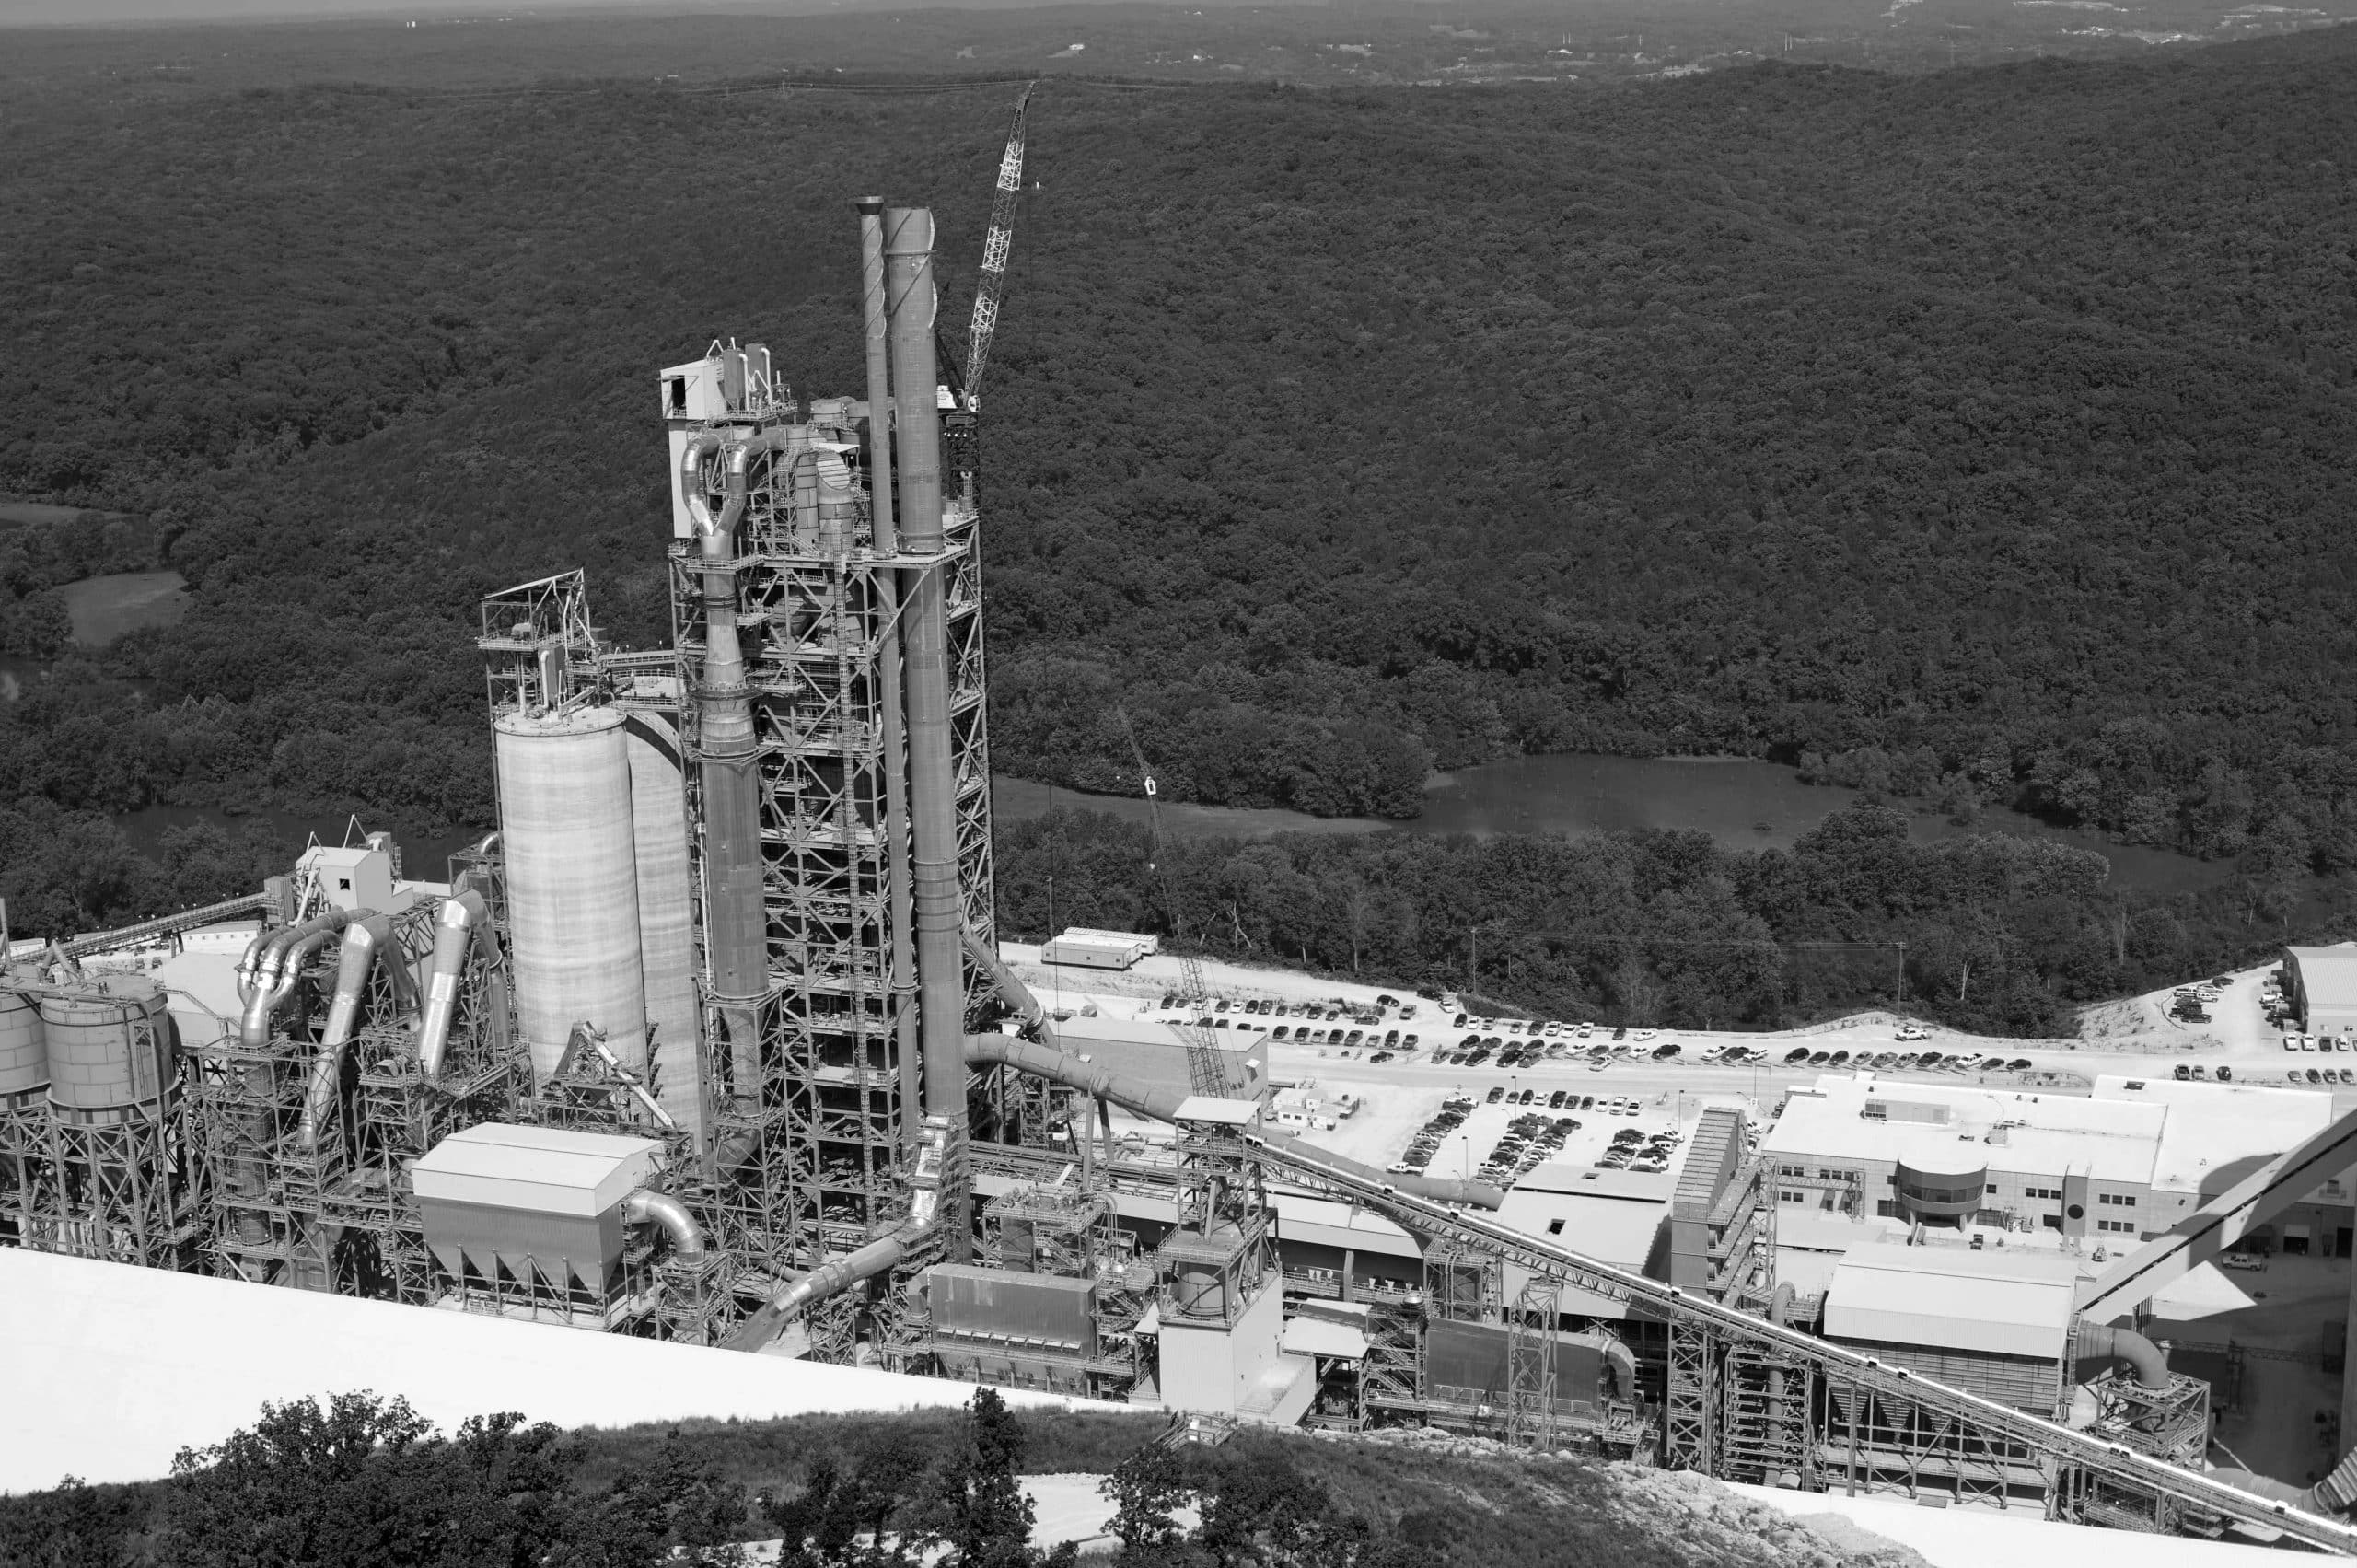 Holcim Cement plant in USA